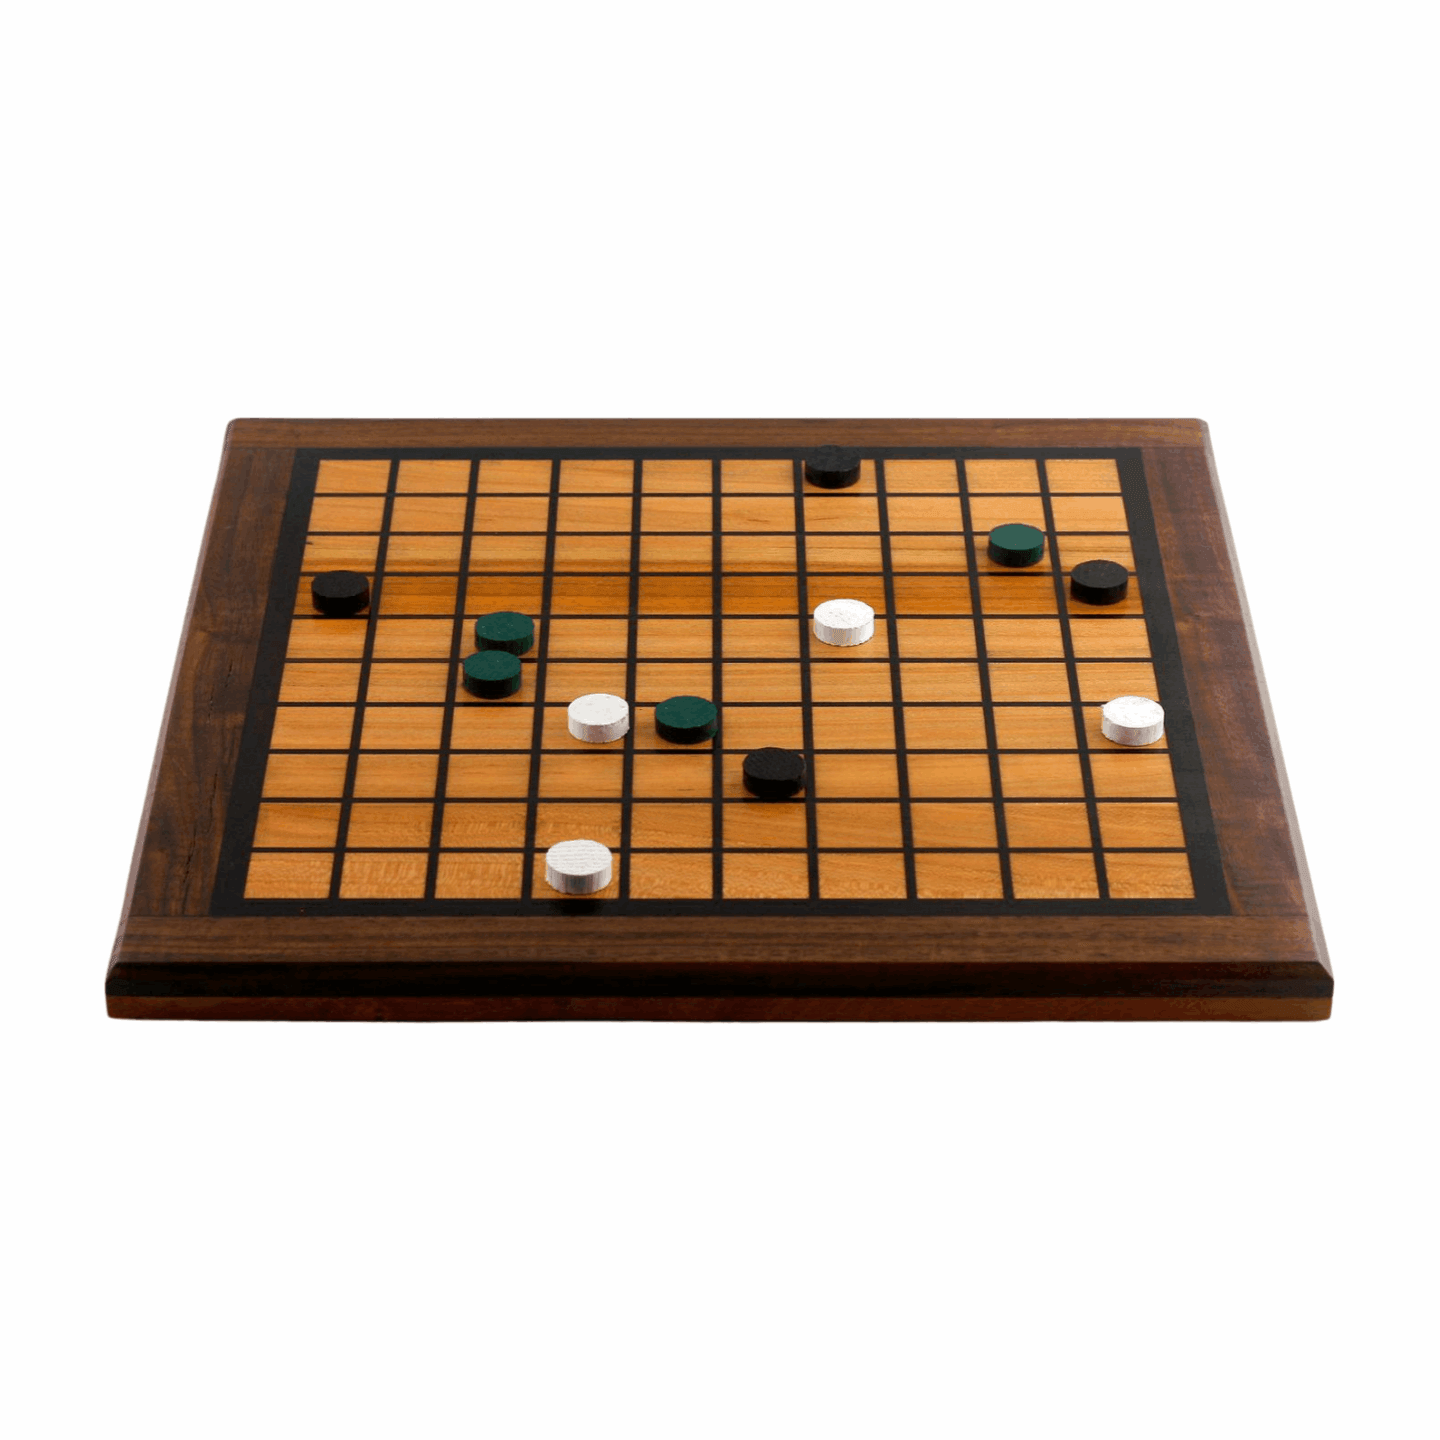 Wooden game board with grid and game pieces